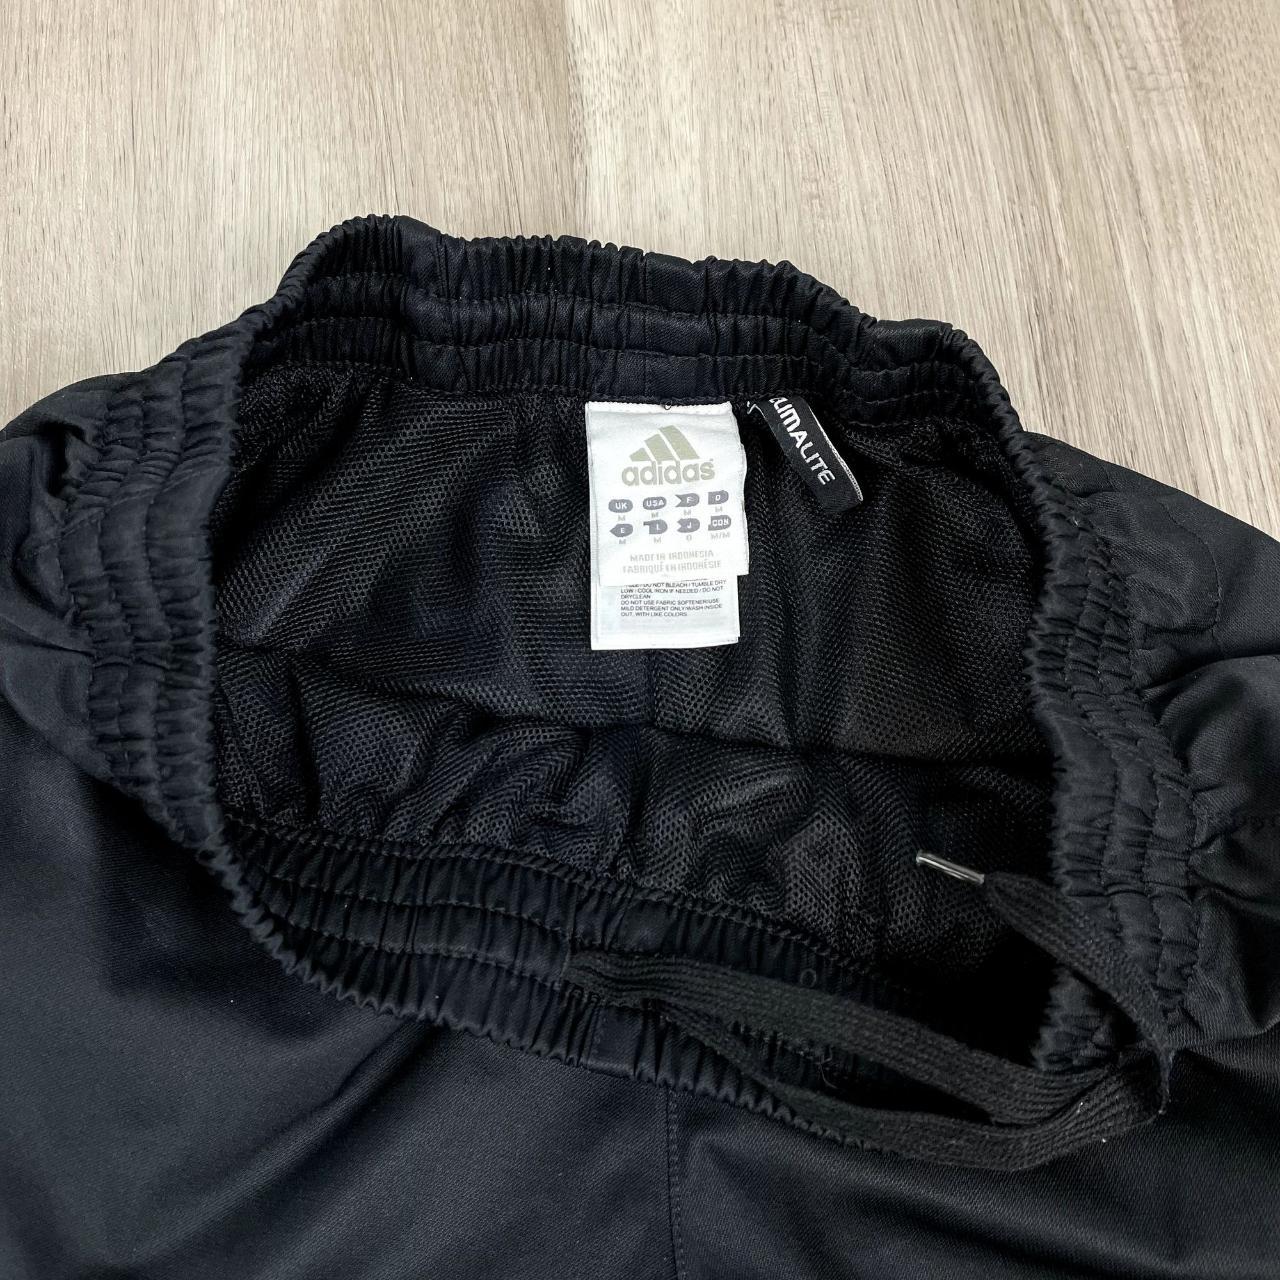 Adidas Climaproof black track pants with embroidered... - Depop